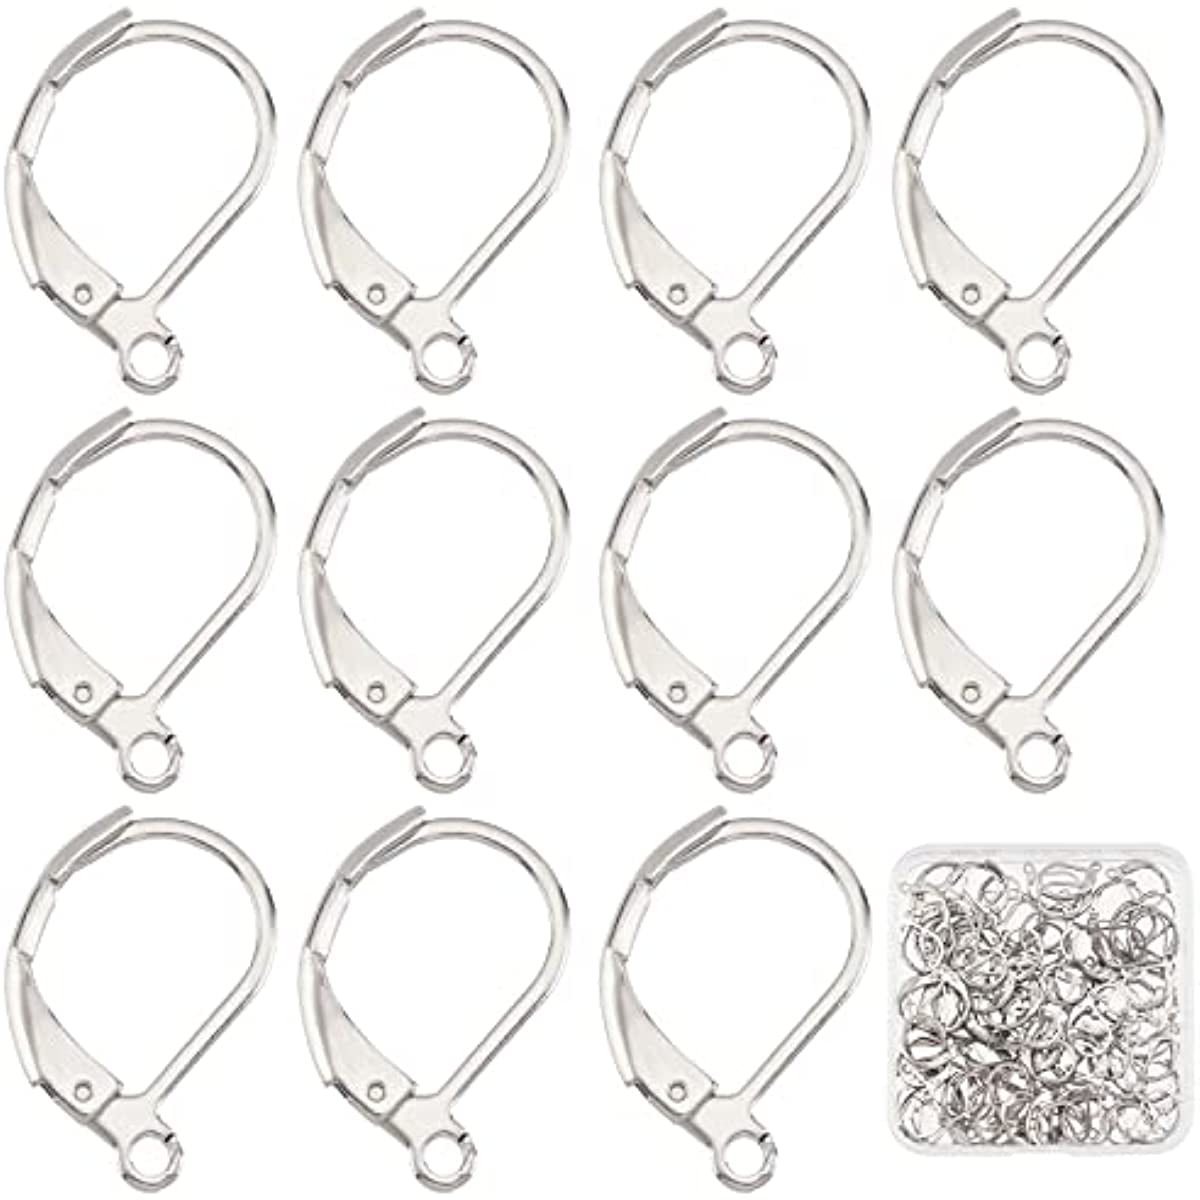 Stainless Steel Latch Back Earring Wires- 20pcs